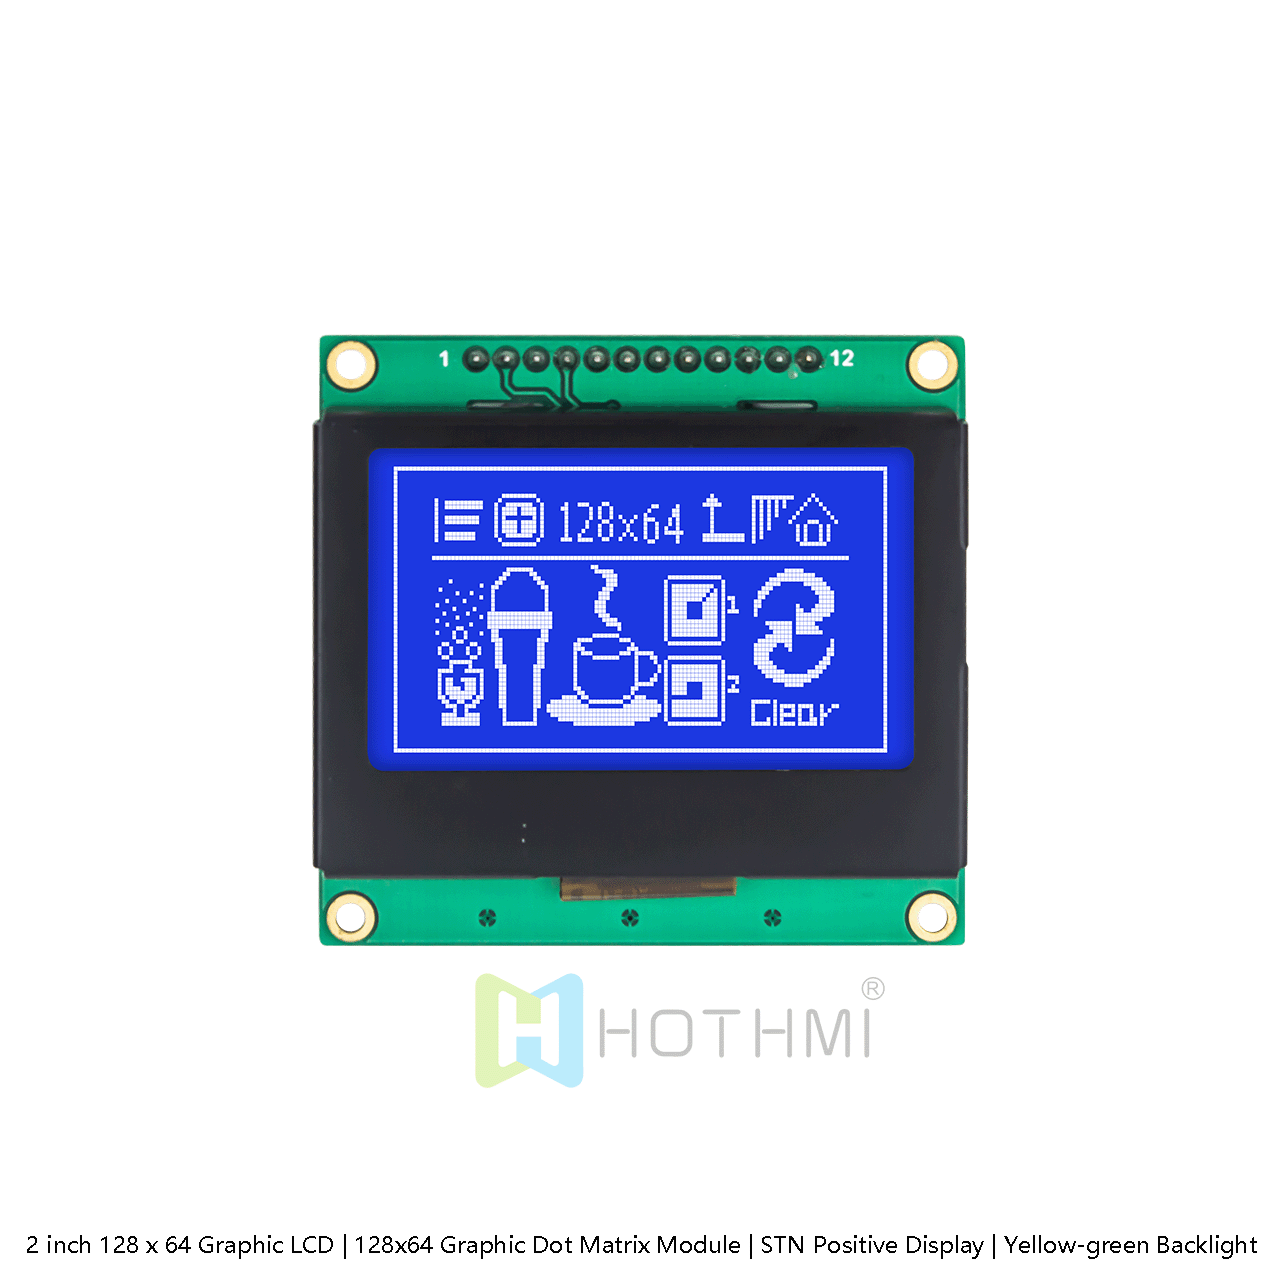 2 inch 128 x 64 Graphic LCD | For Arduino | White Backlight | 128x64 Graphic LCD Module | ST7567 SPI | STN Negative Display | White Characters on Blue Background